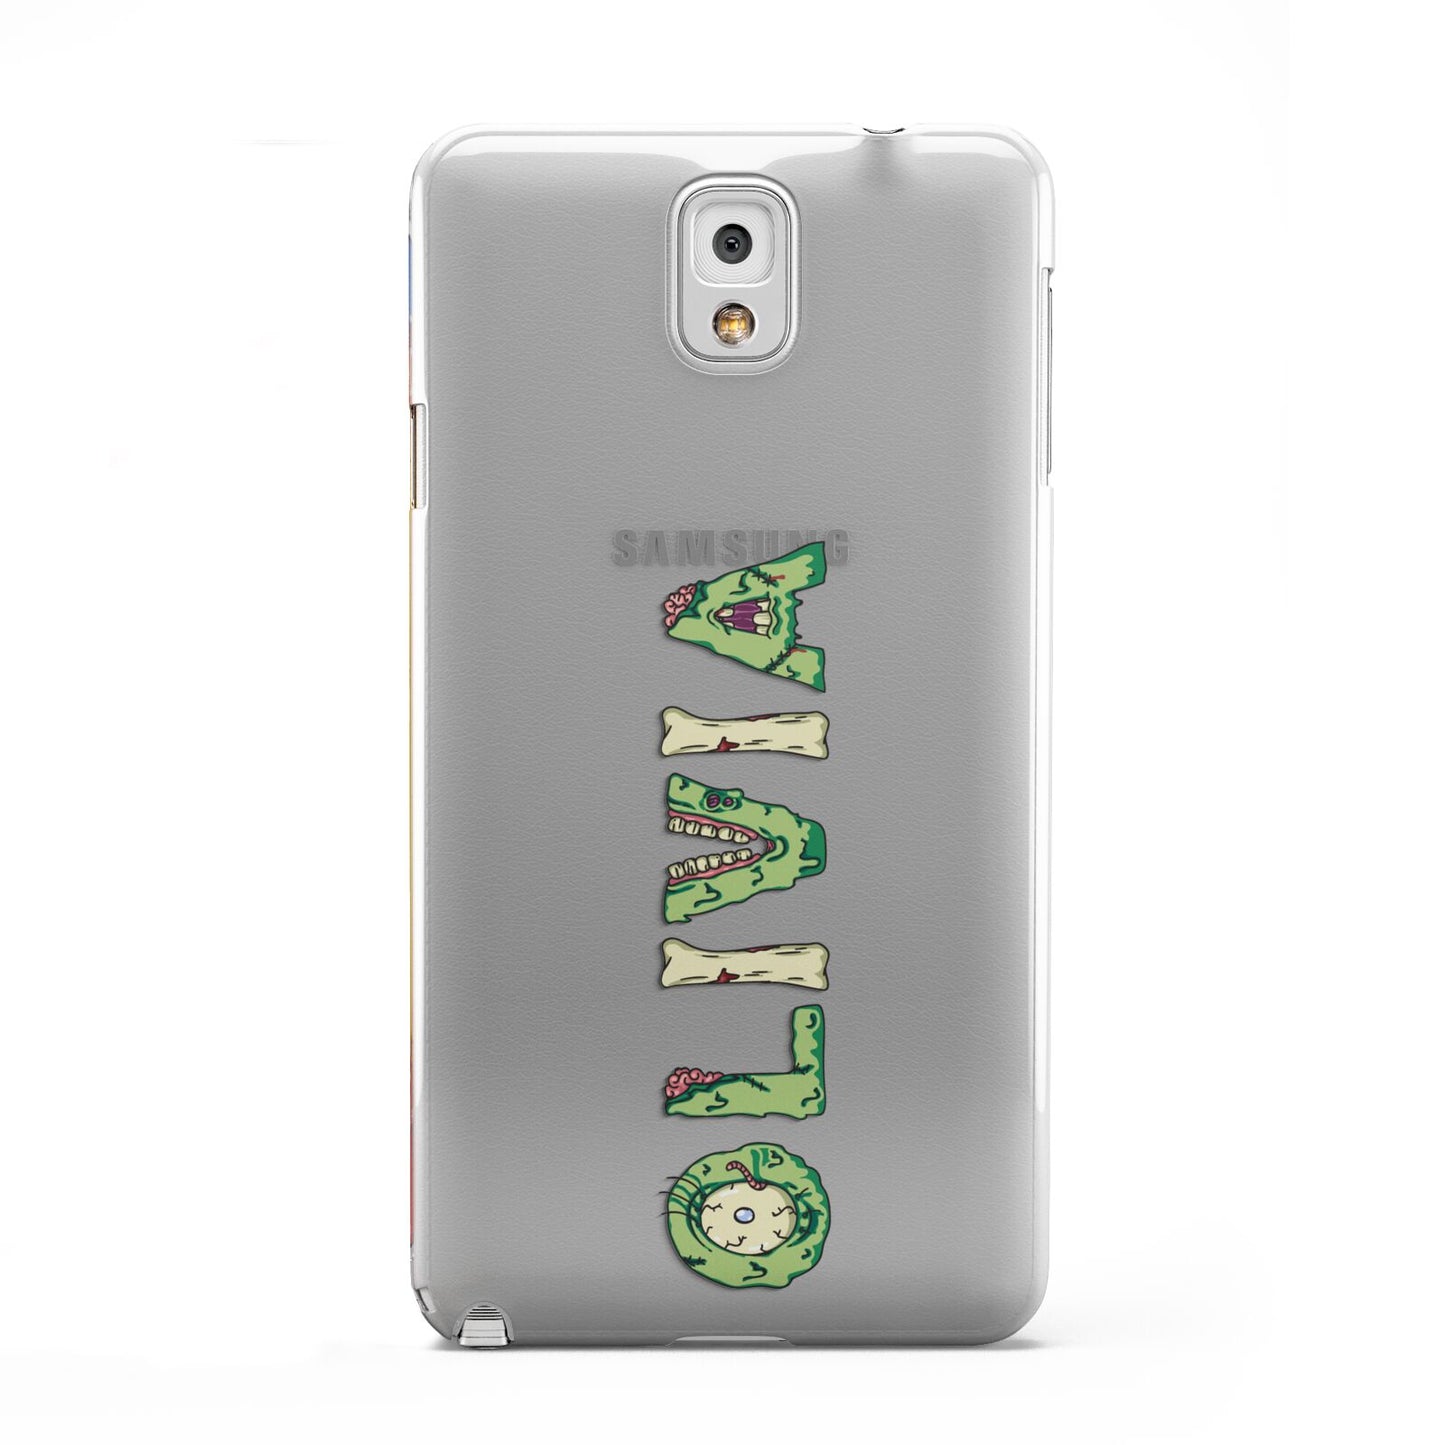 Customised Name Zombie Samsung Galaxy Note 3 Case